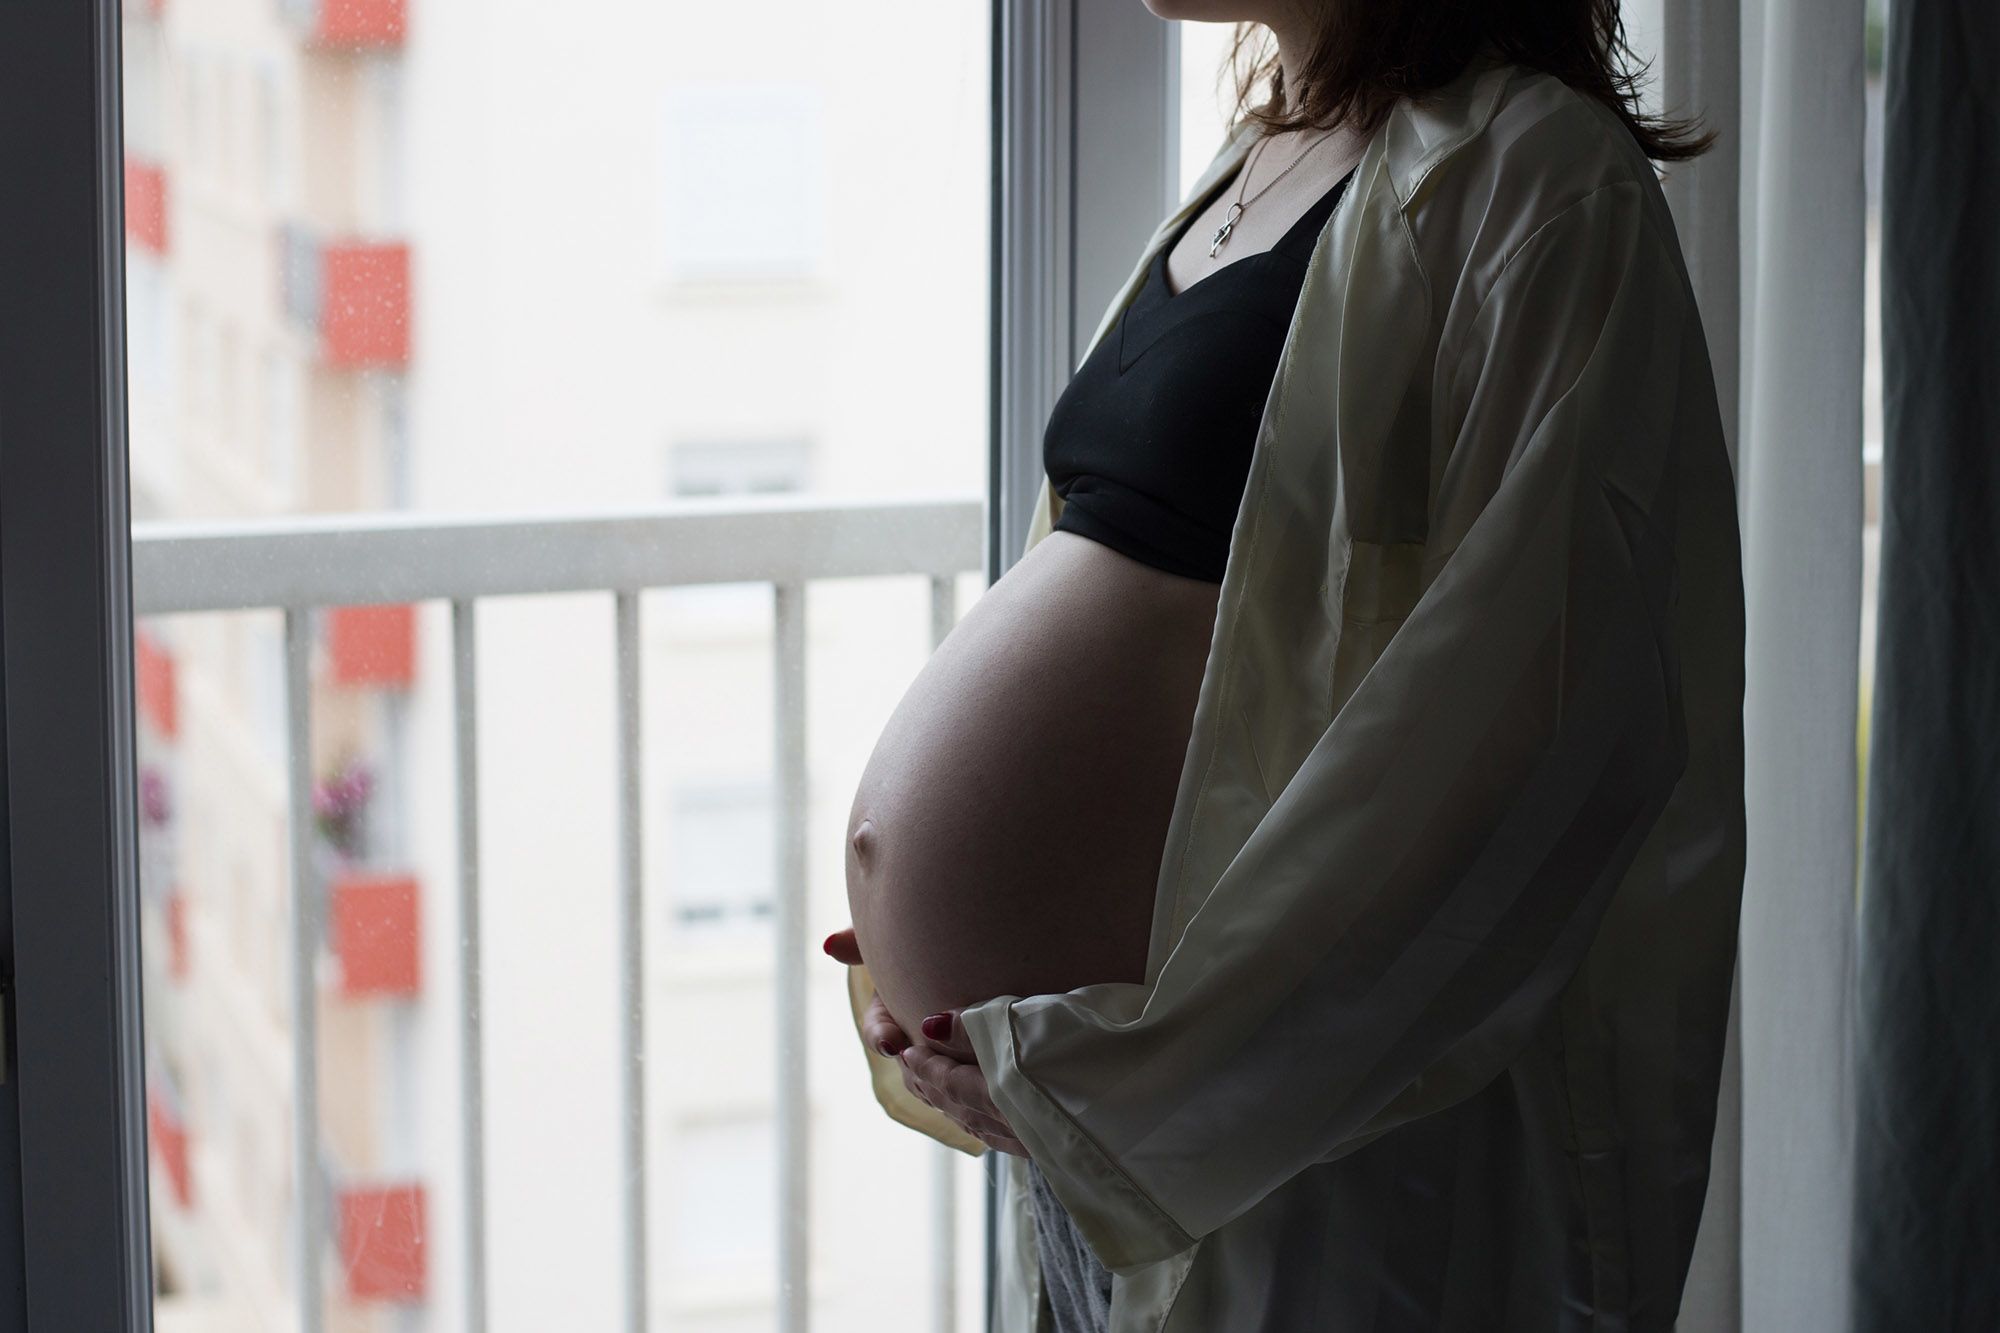 Stress during pregnancy may harm unborn baby's brain, studies find